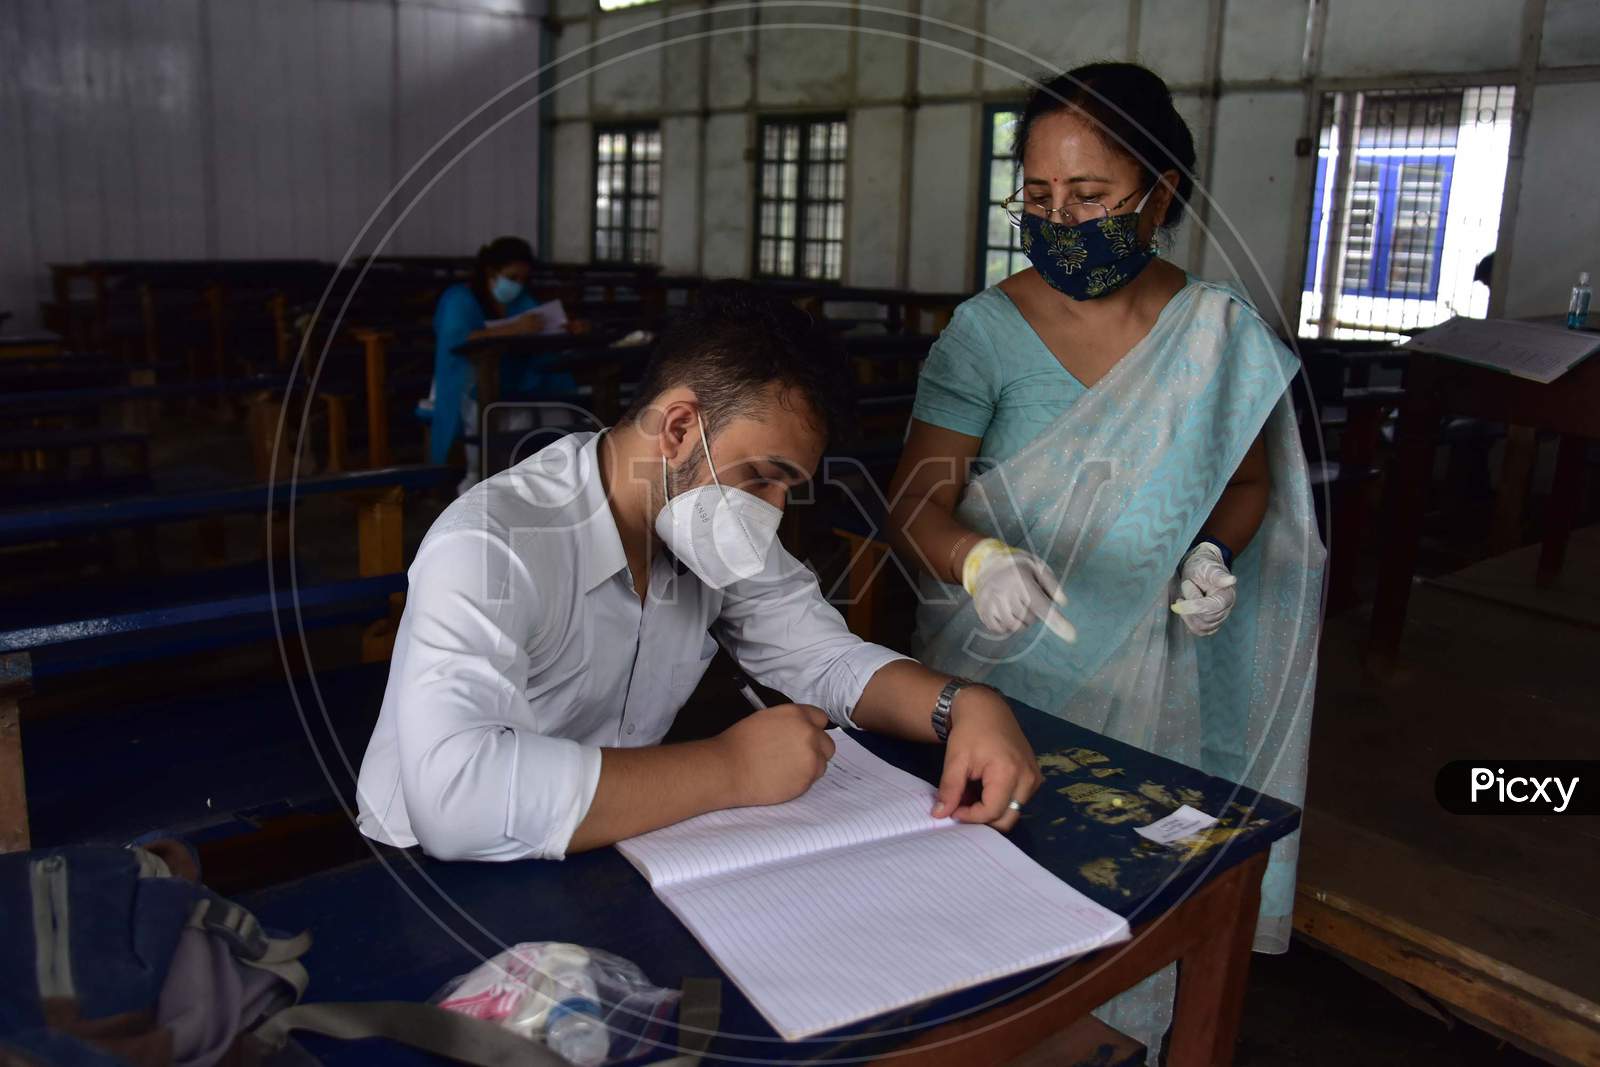 Students maintain social distancing as they attend a class after schools and colleges reopened after more than 5-months closure due to the Covid-19 coronavirus pandemic in  Nagaon District of Assam on Sep 21,2020.